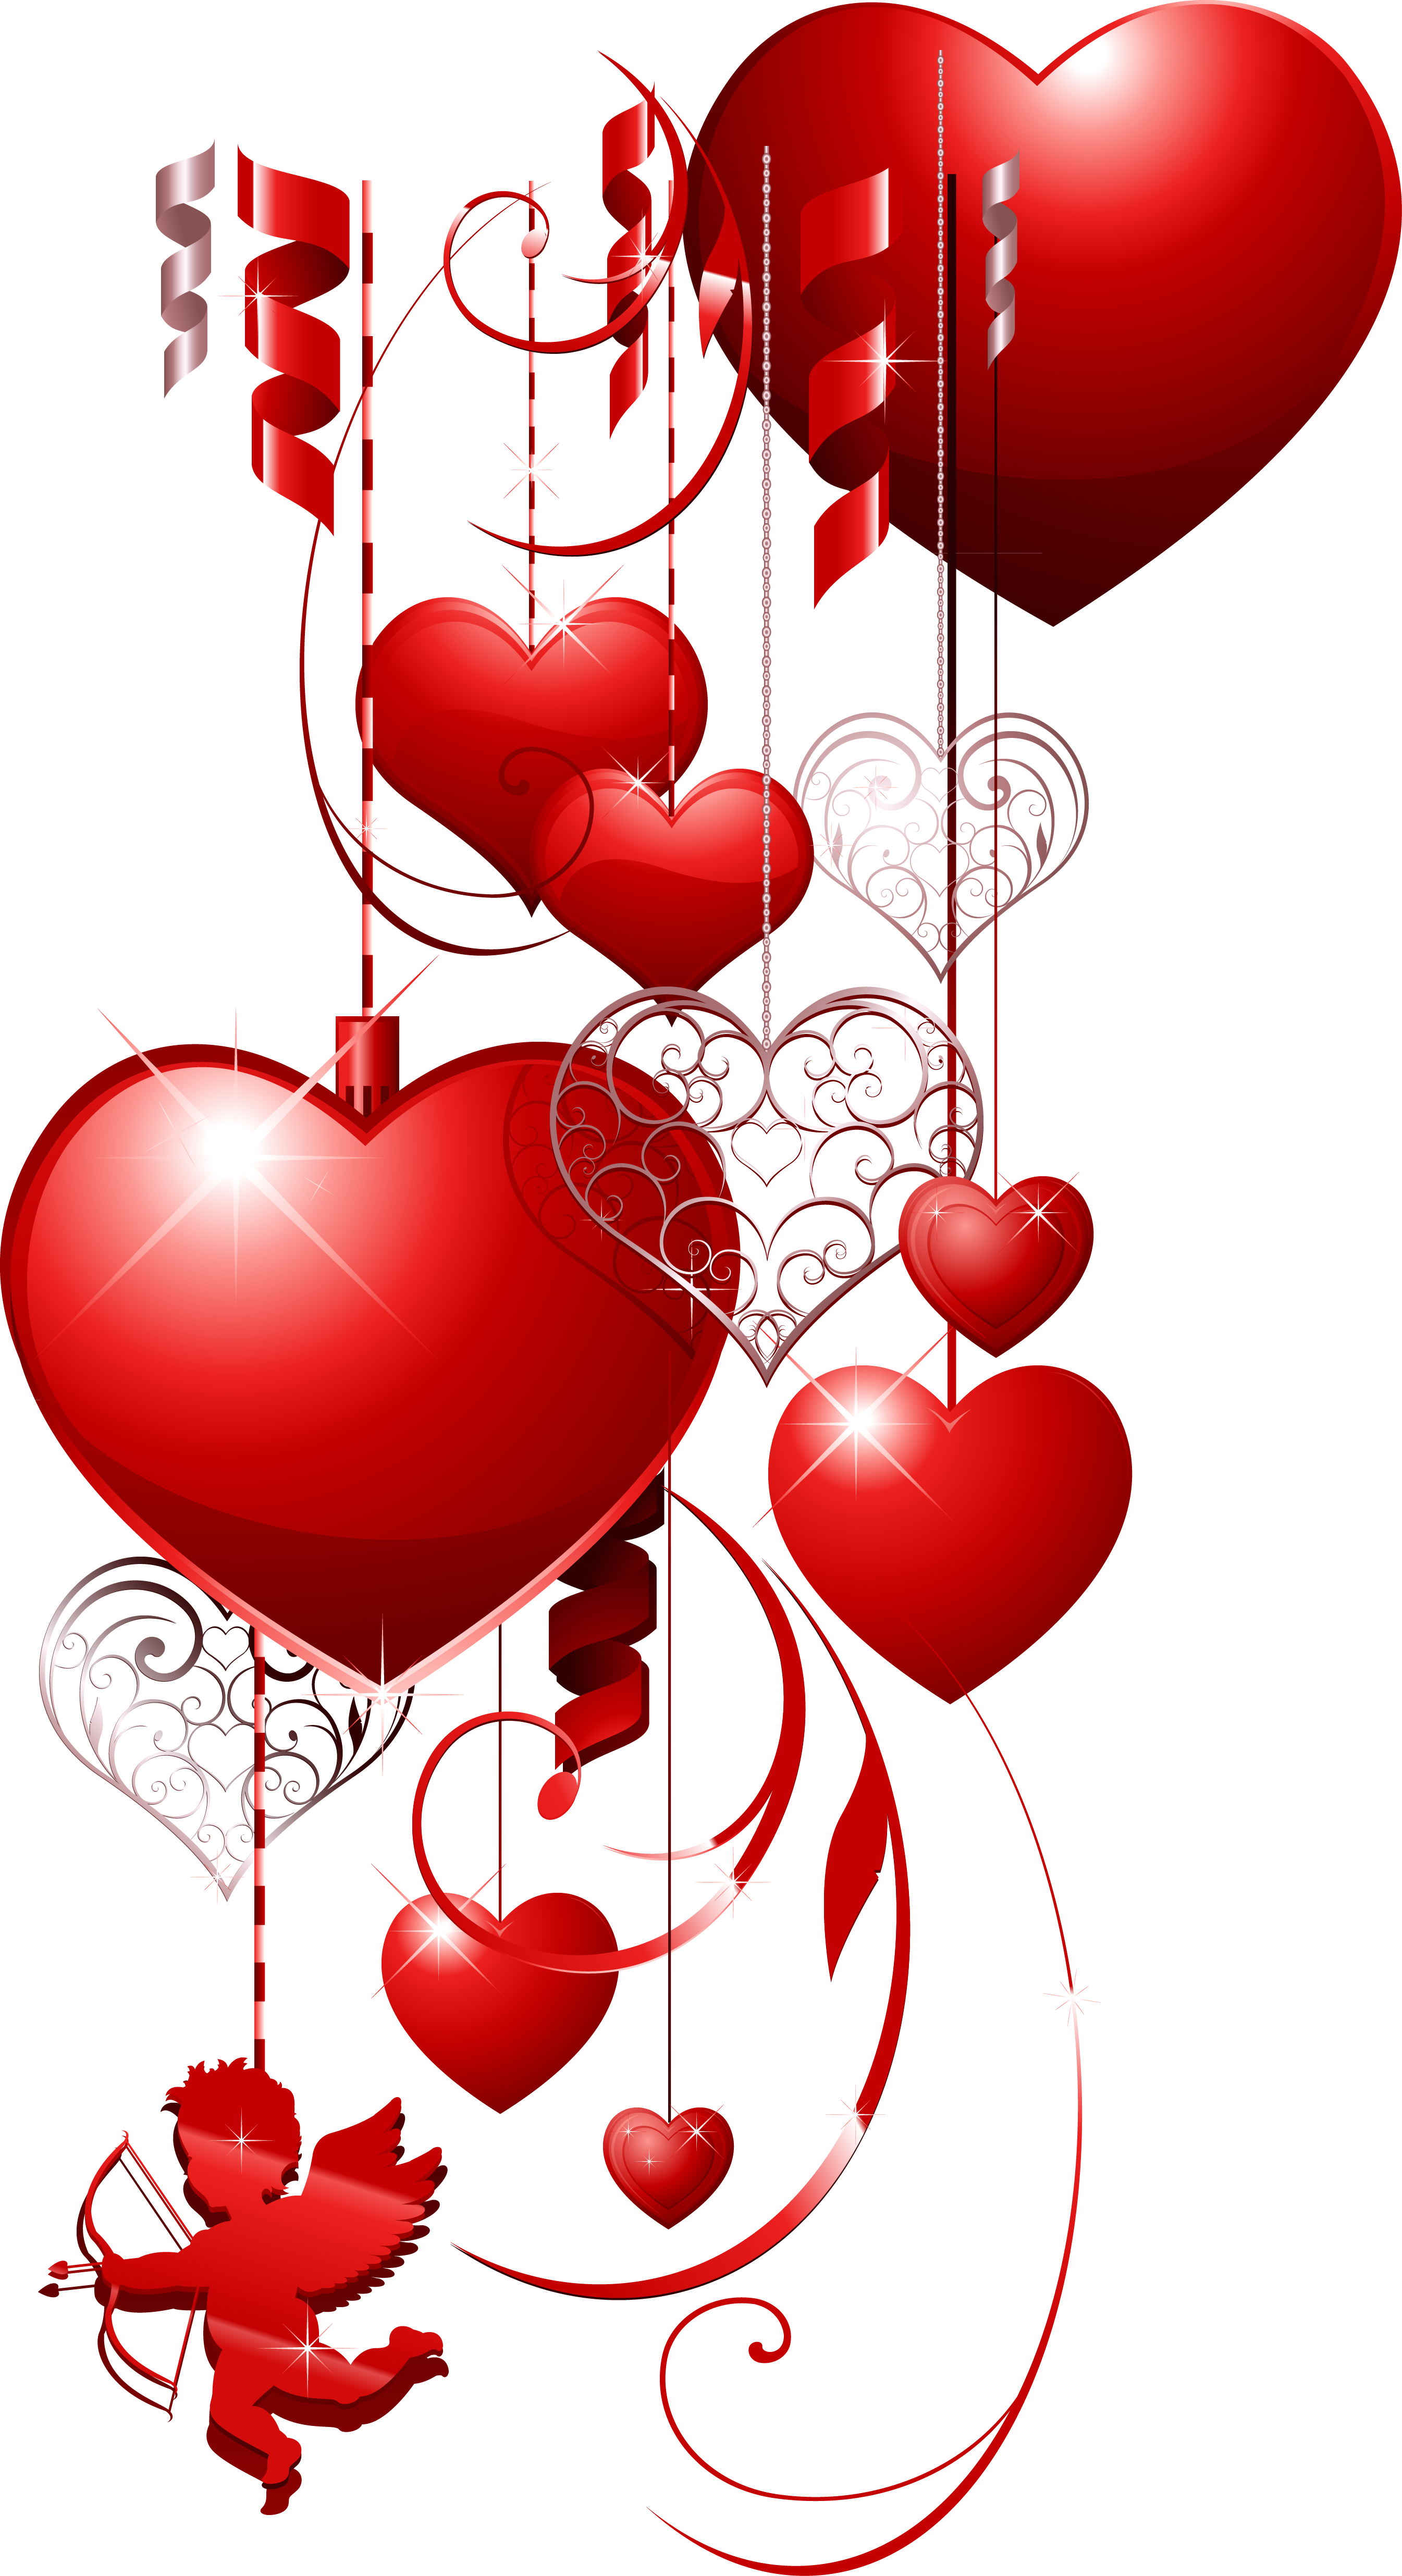 Heart February Romantic Valentine'S Day PNG Image High Quality Clipart